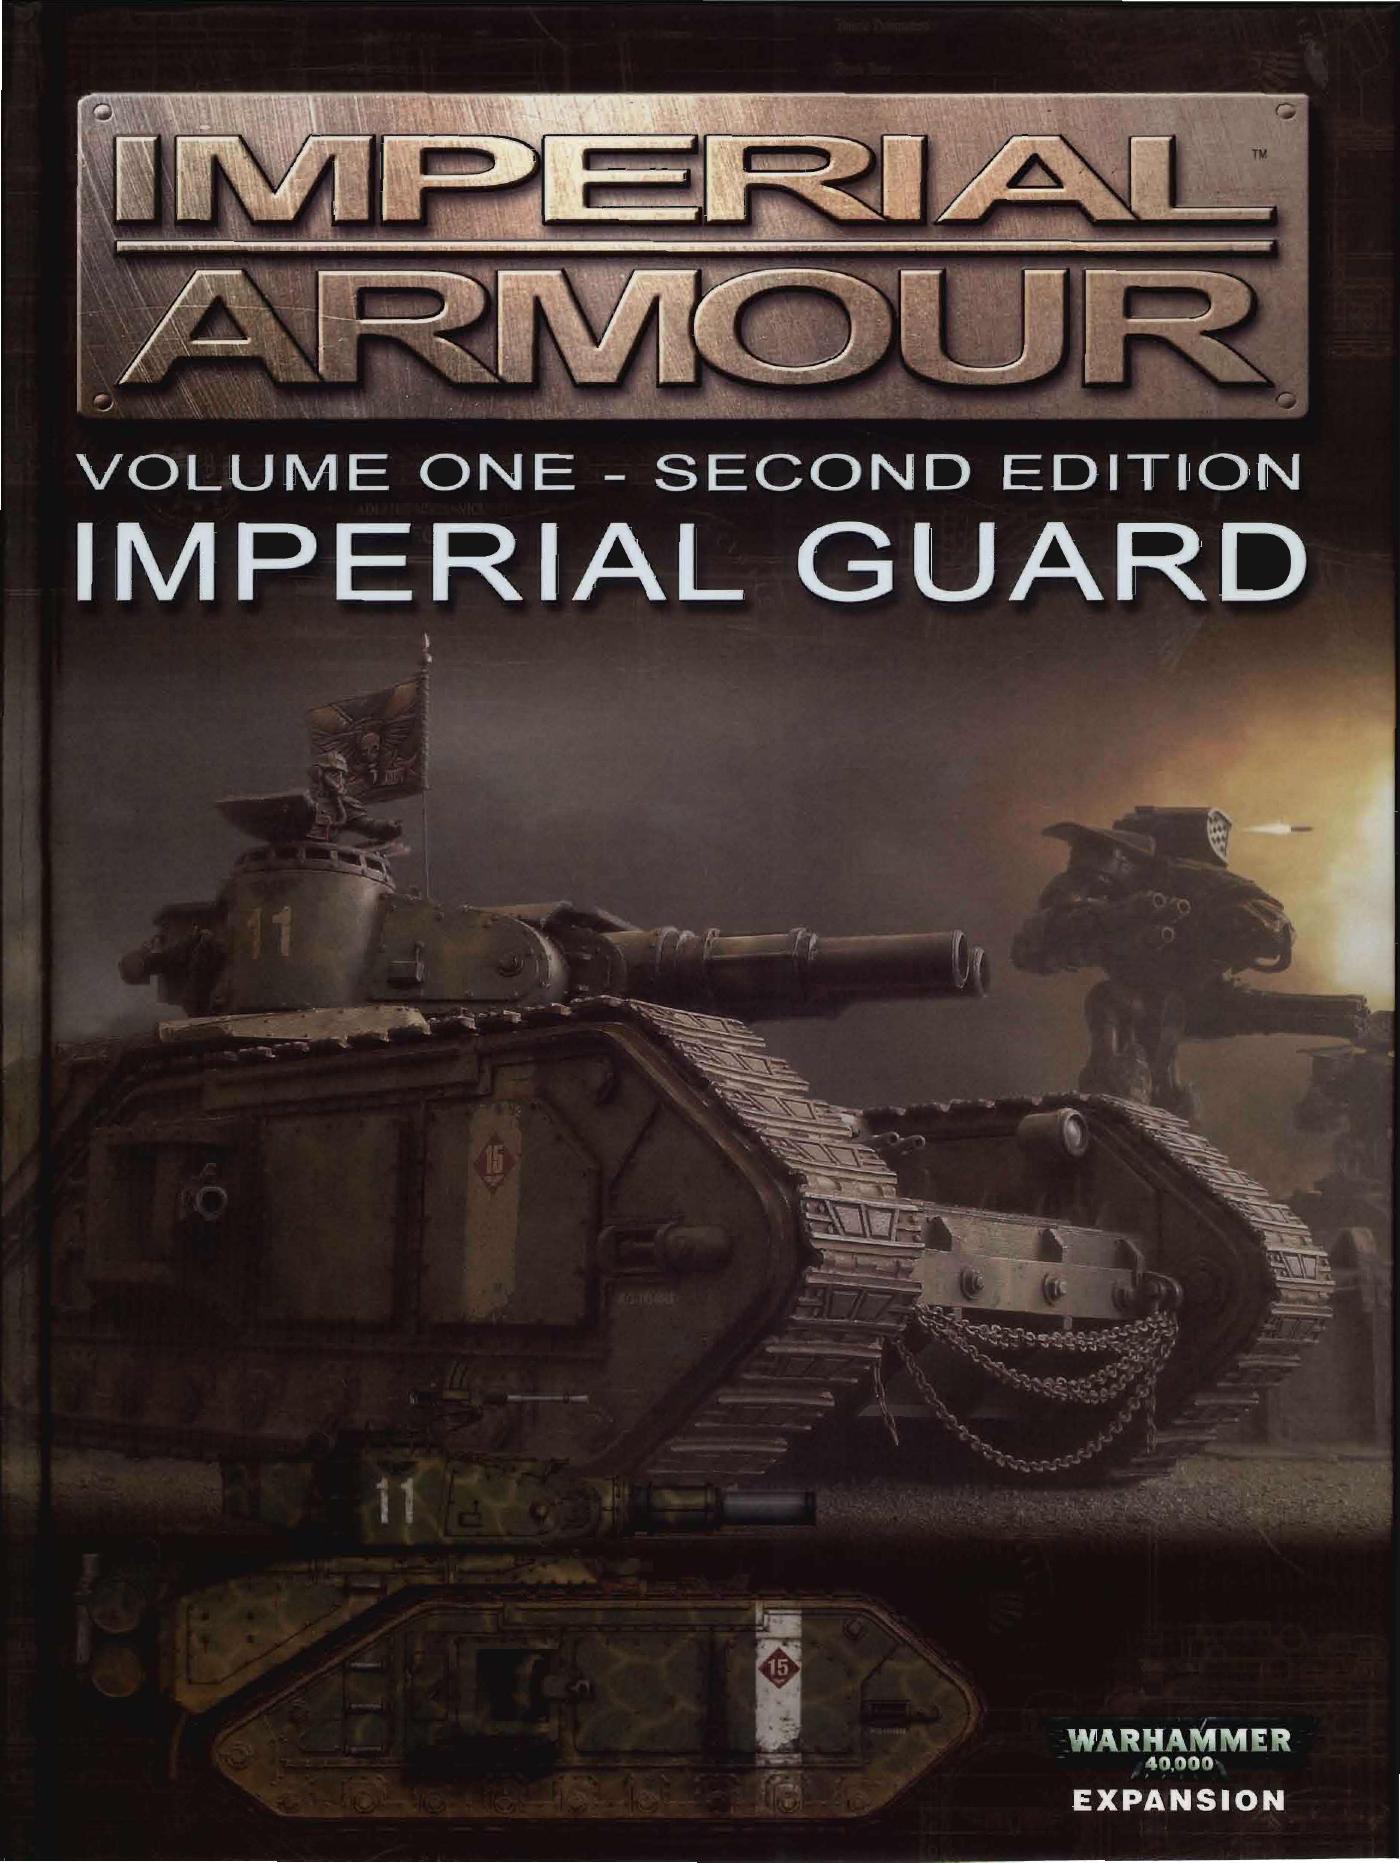 Imperial Armour Vol 1 2nd ed Imperial Guard